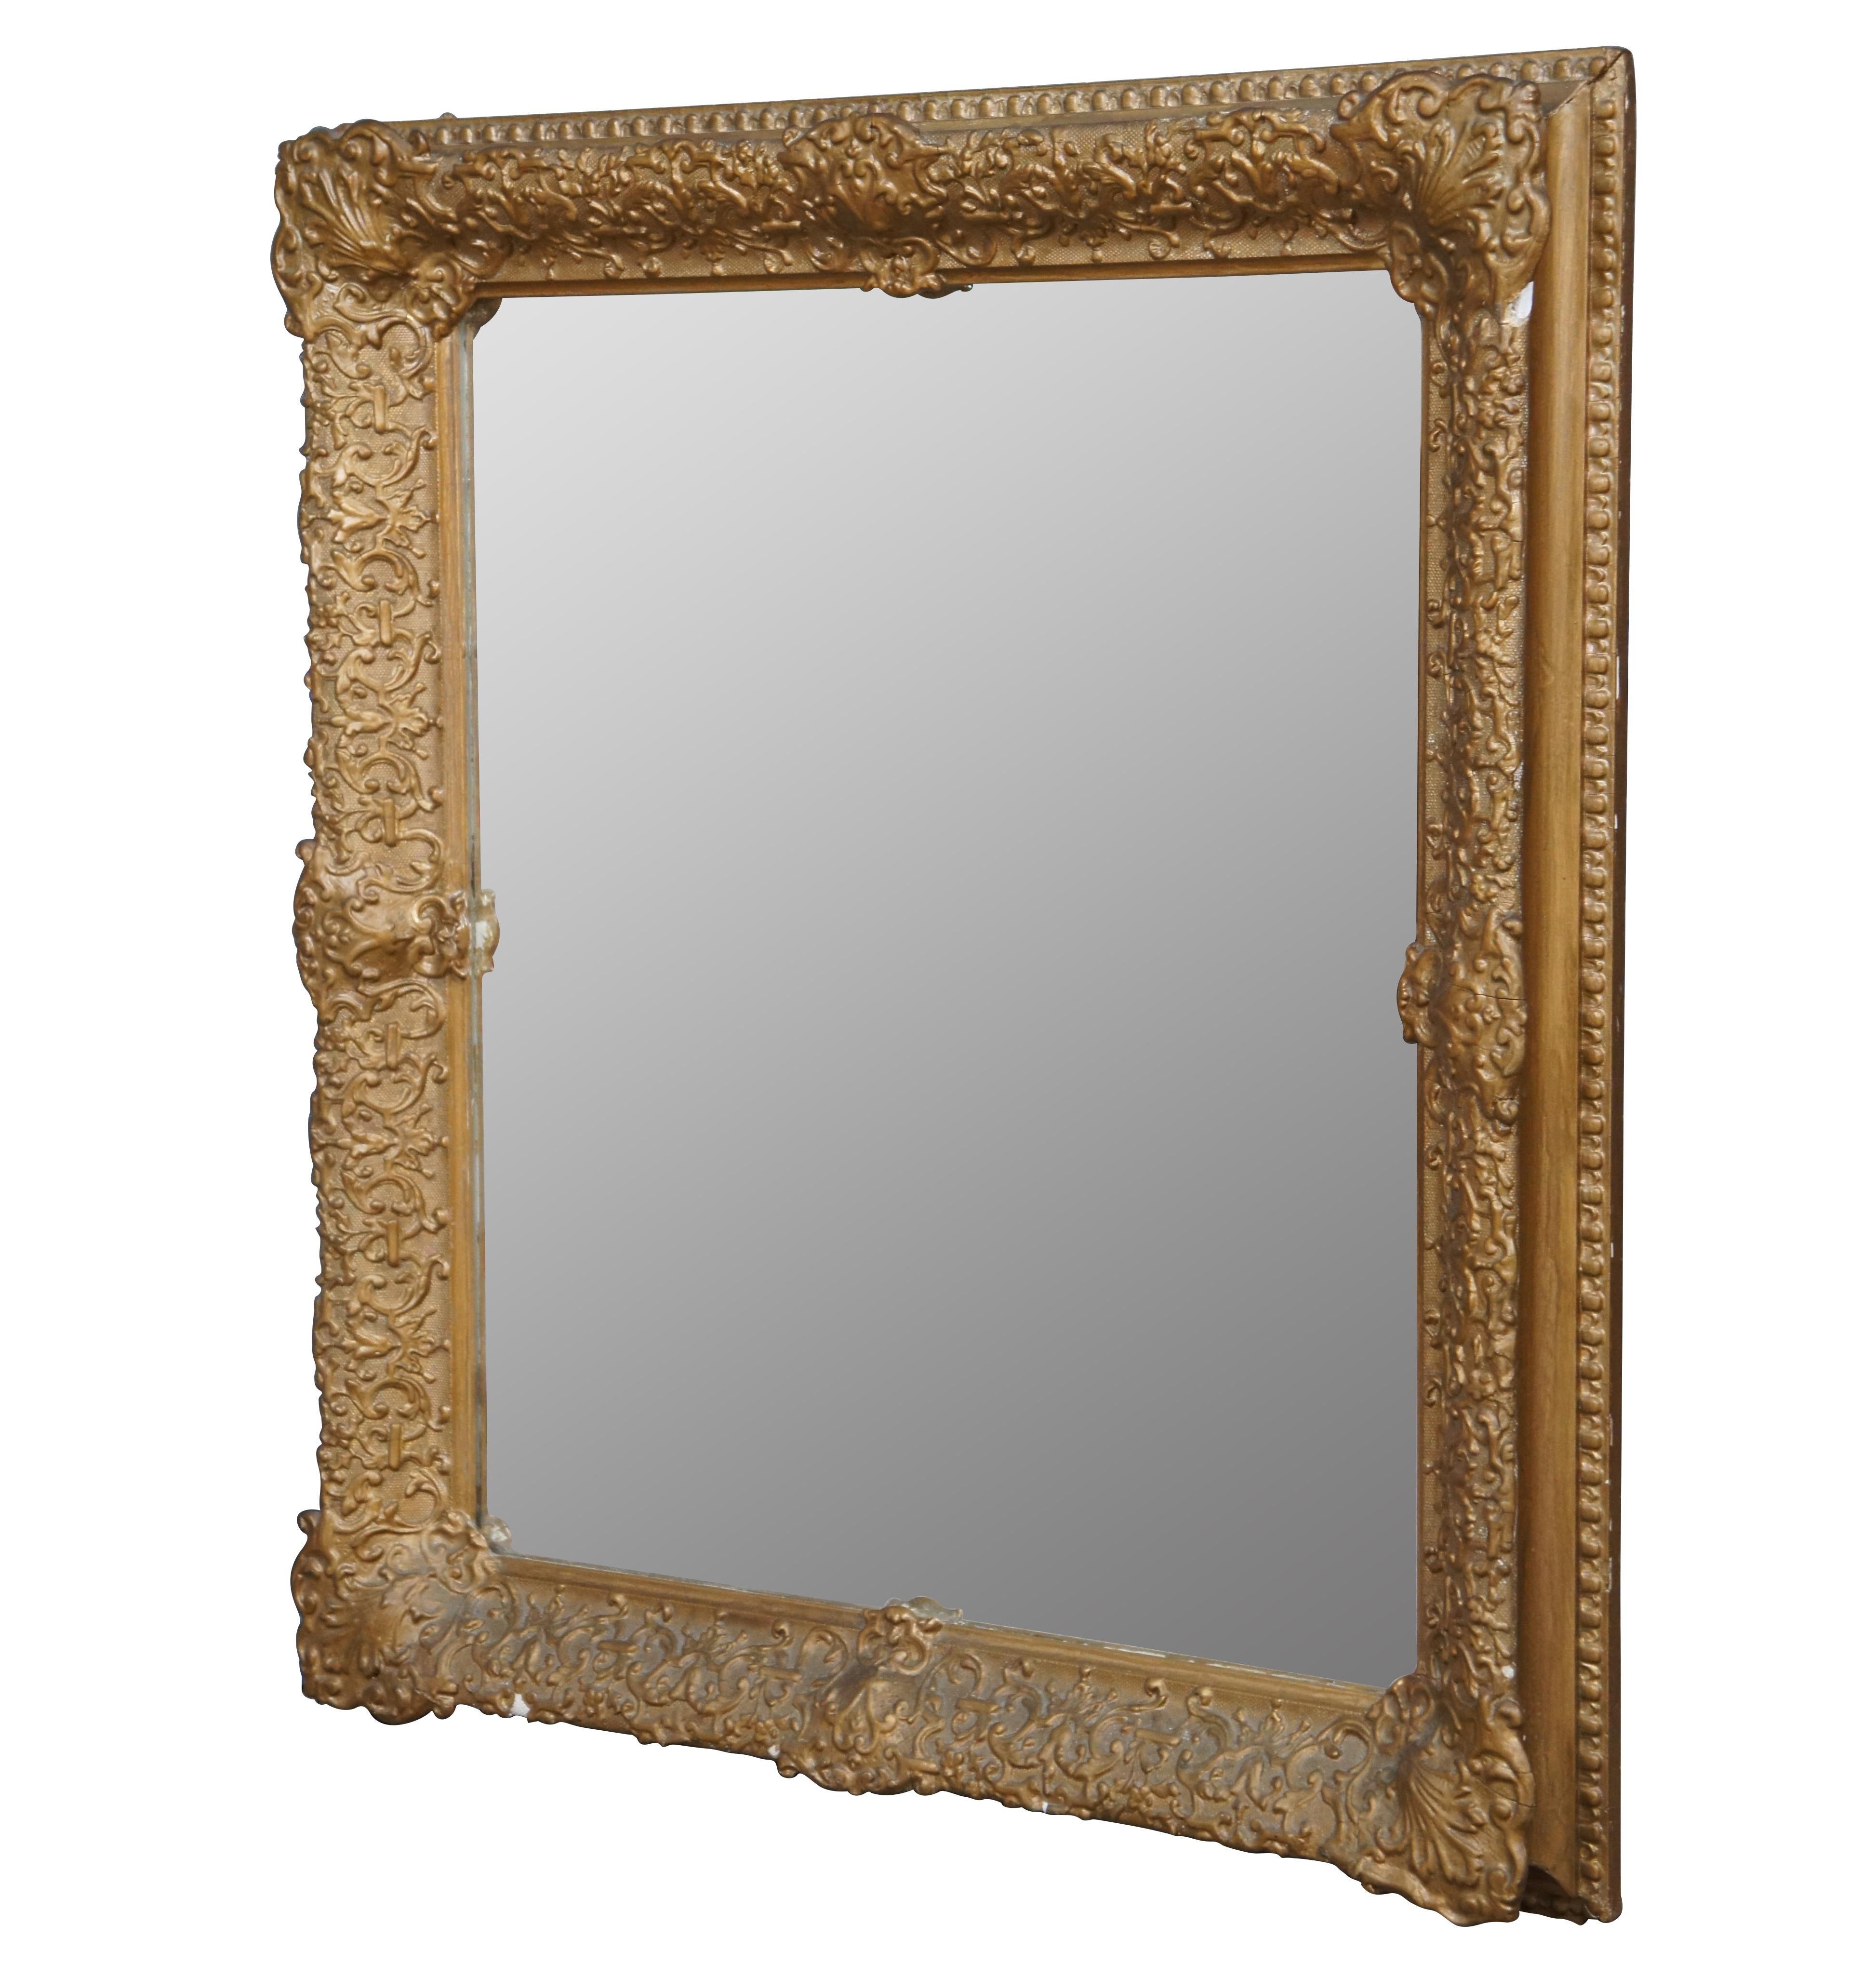 Antique rectangular wall mirror featuring gilded plaster / gesso over wood frame, molded with swirling foliate and scallop motifs.

Measures: 27.5” x 3” x 30.5” / Sans Frame - 20.75” x 24” (Width x Depth x Height).